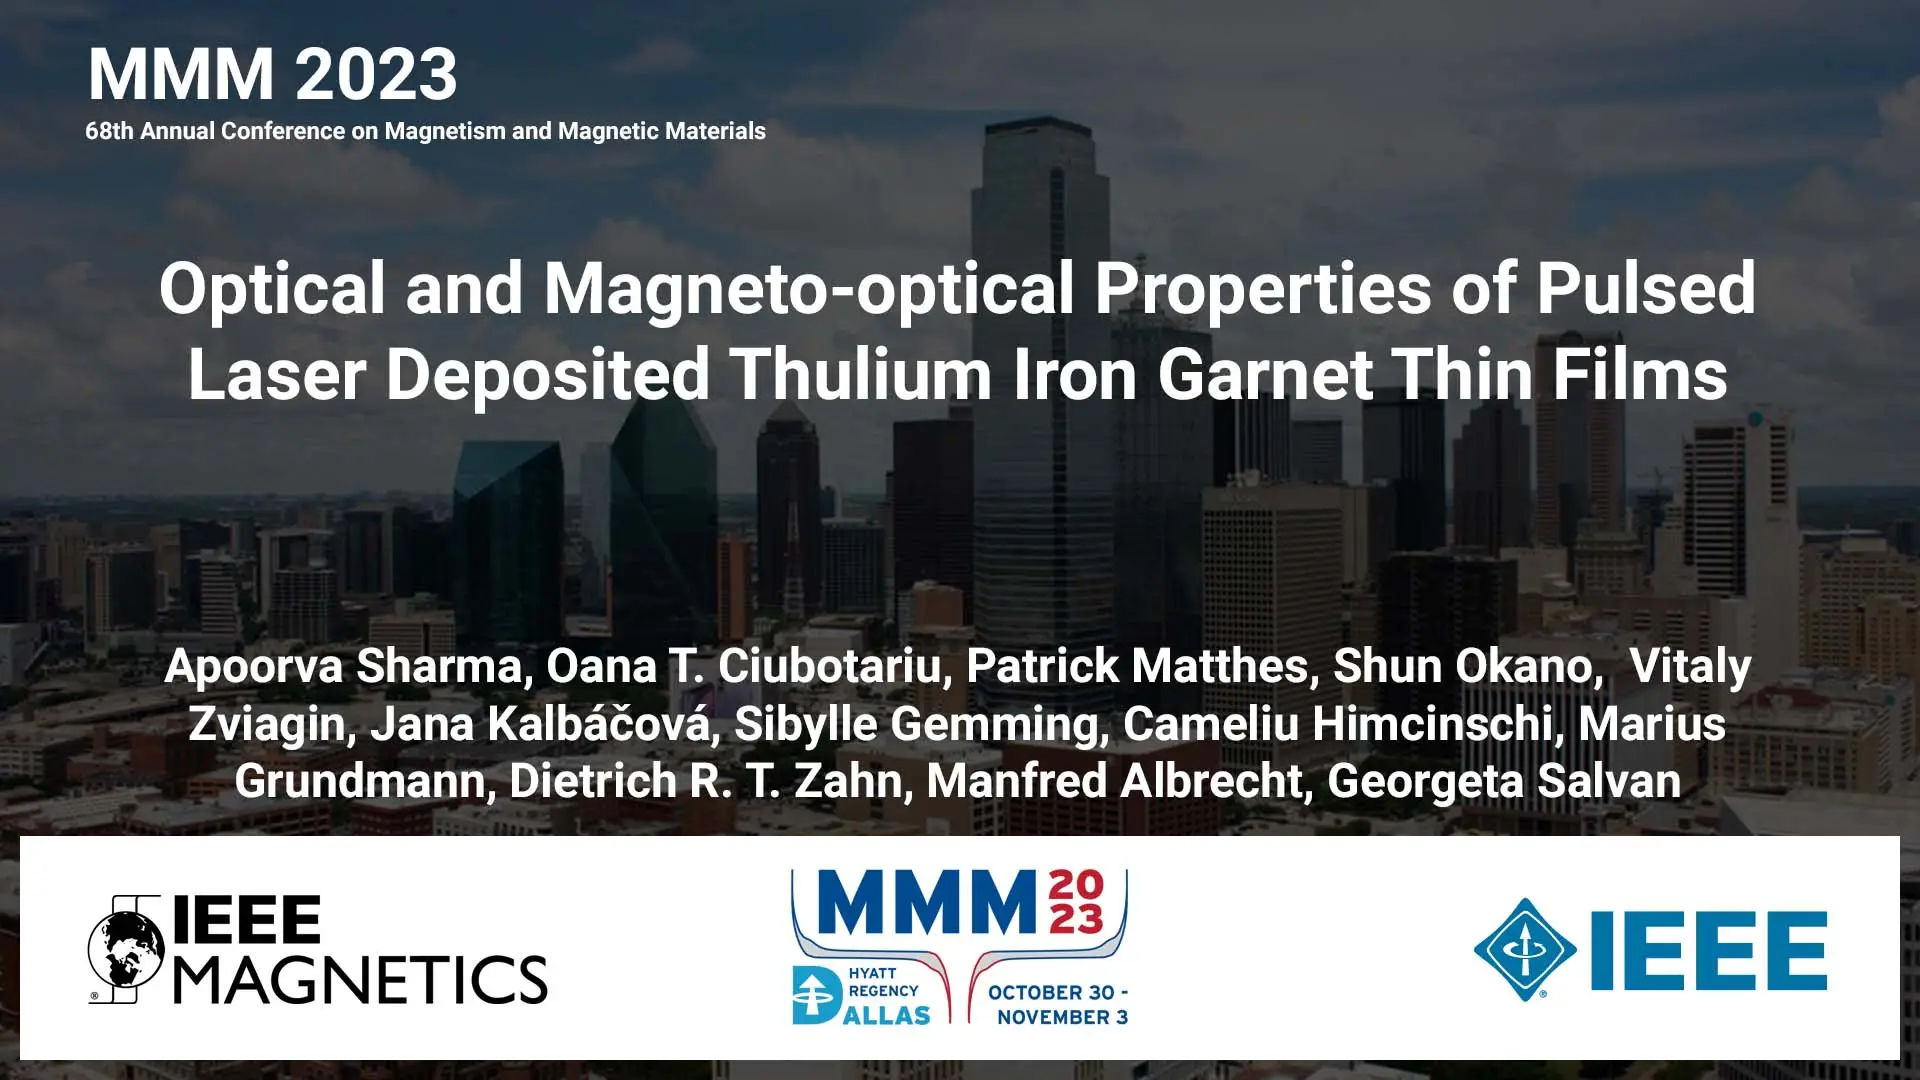 VP11-10: Optical and Magneto-optical Properties of Pulsed Laser Deposited Thulium Iron Garnet Thin Films